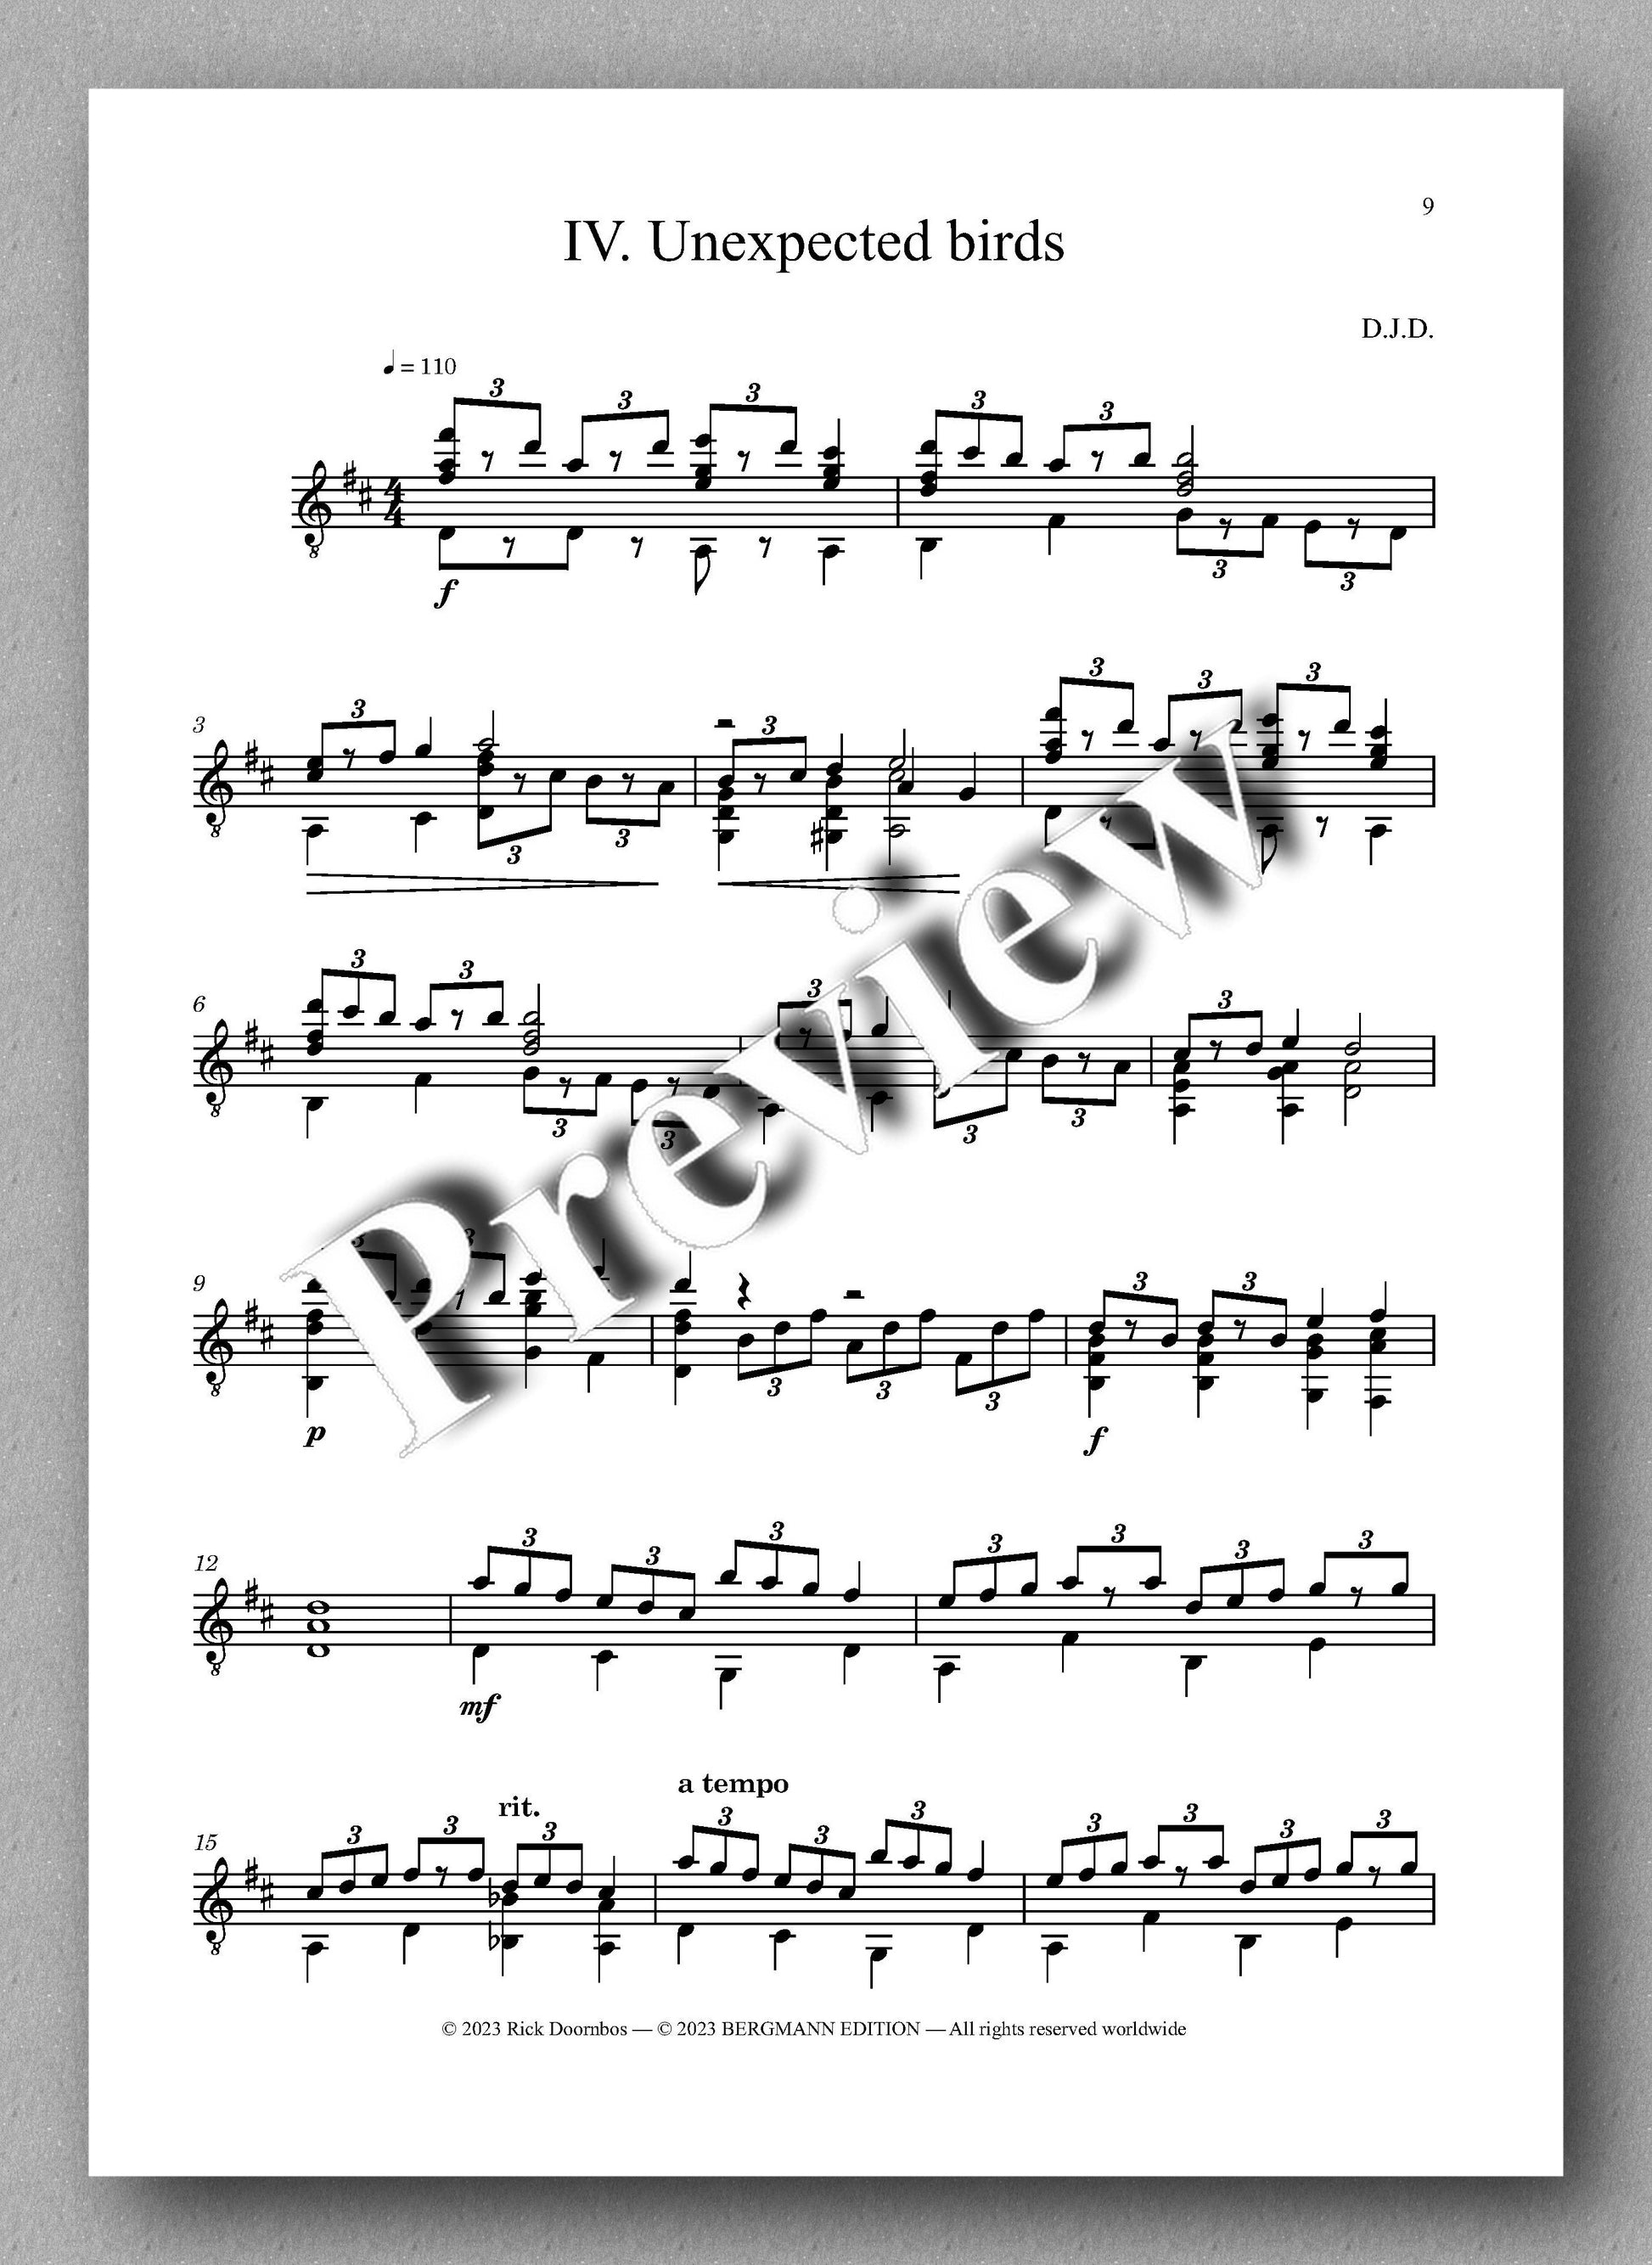 Suite No. 2 by Rick Doornbos - preview of the music score 4